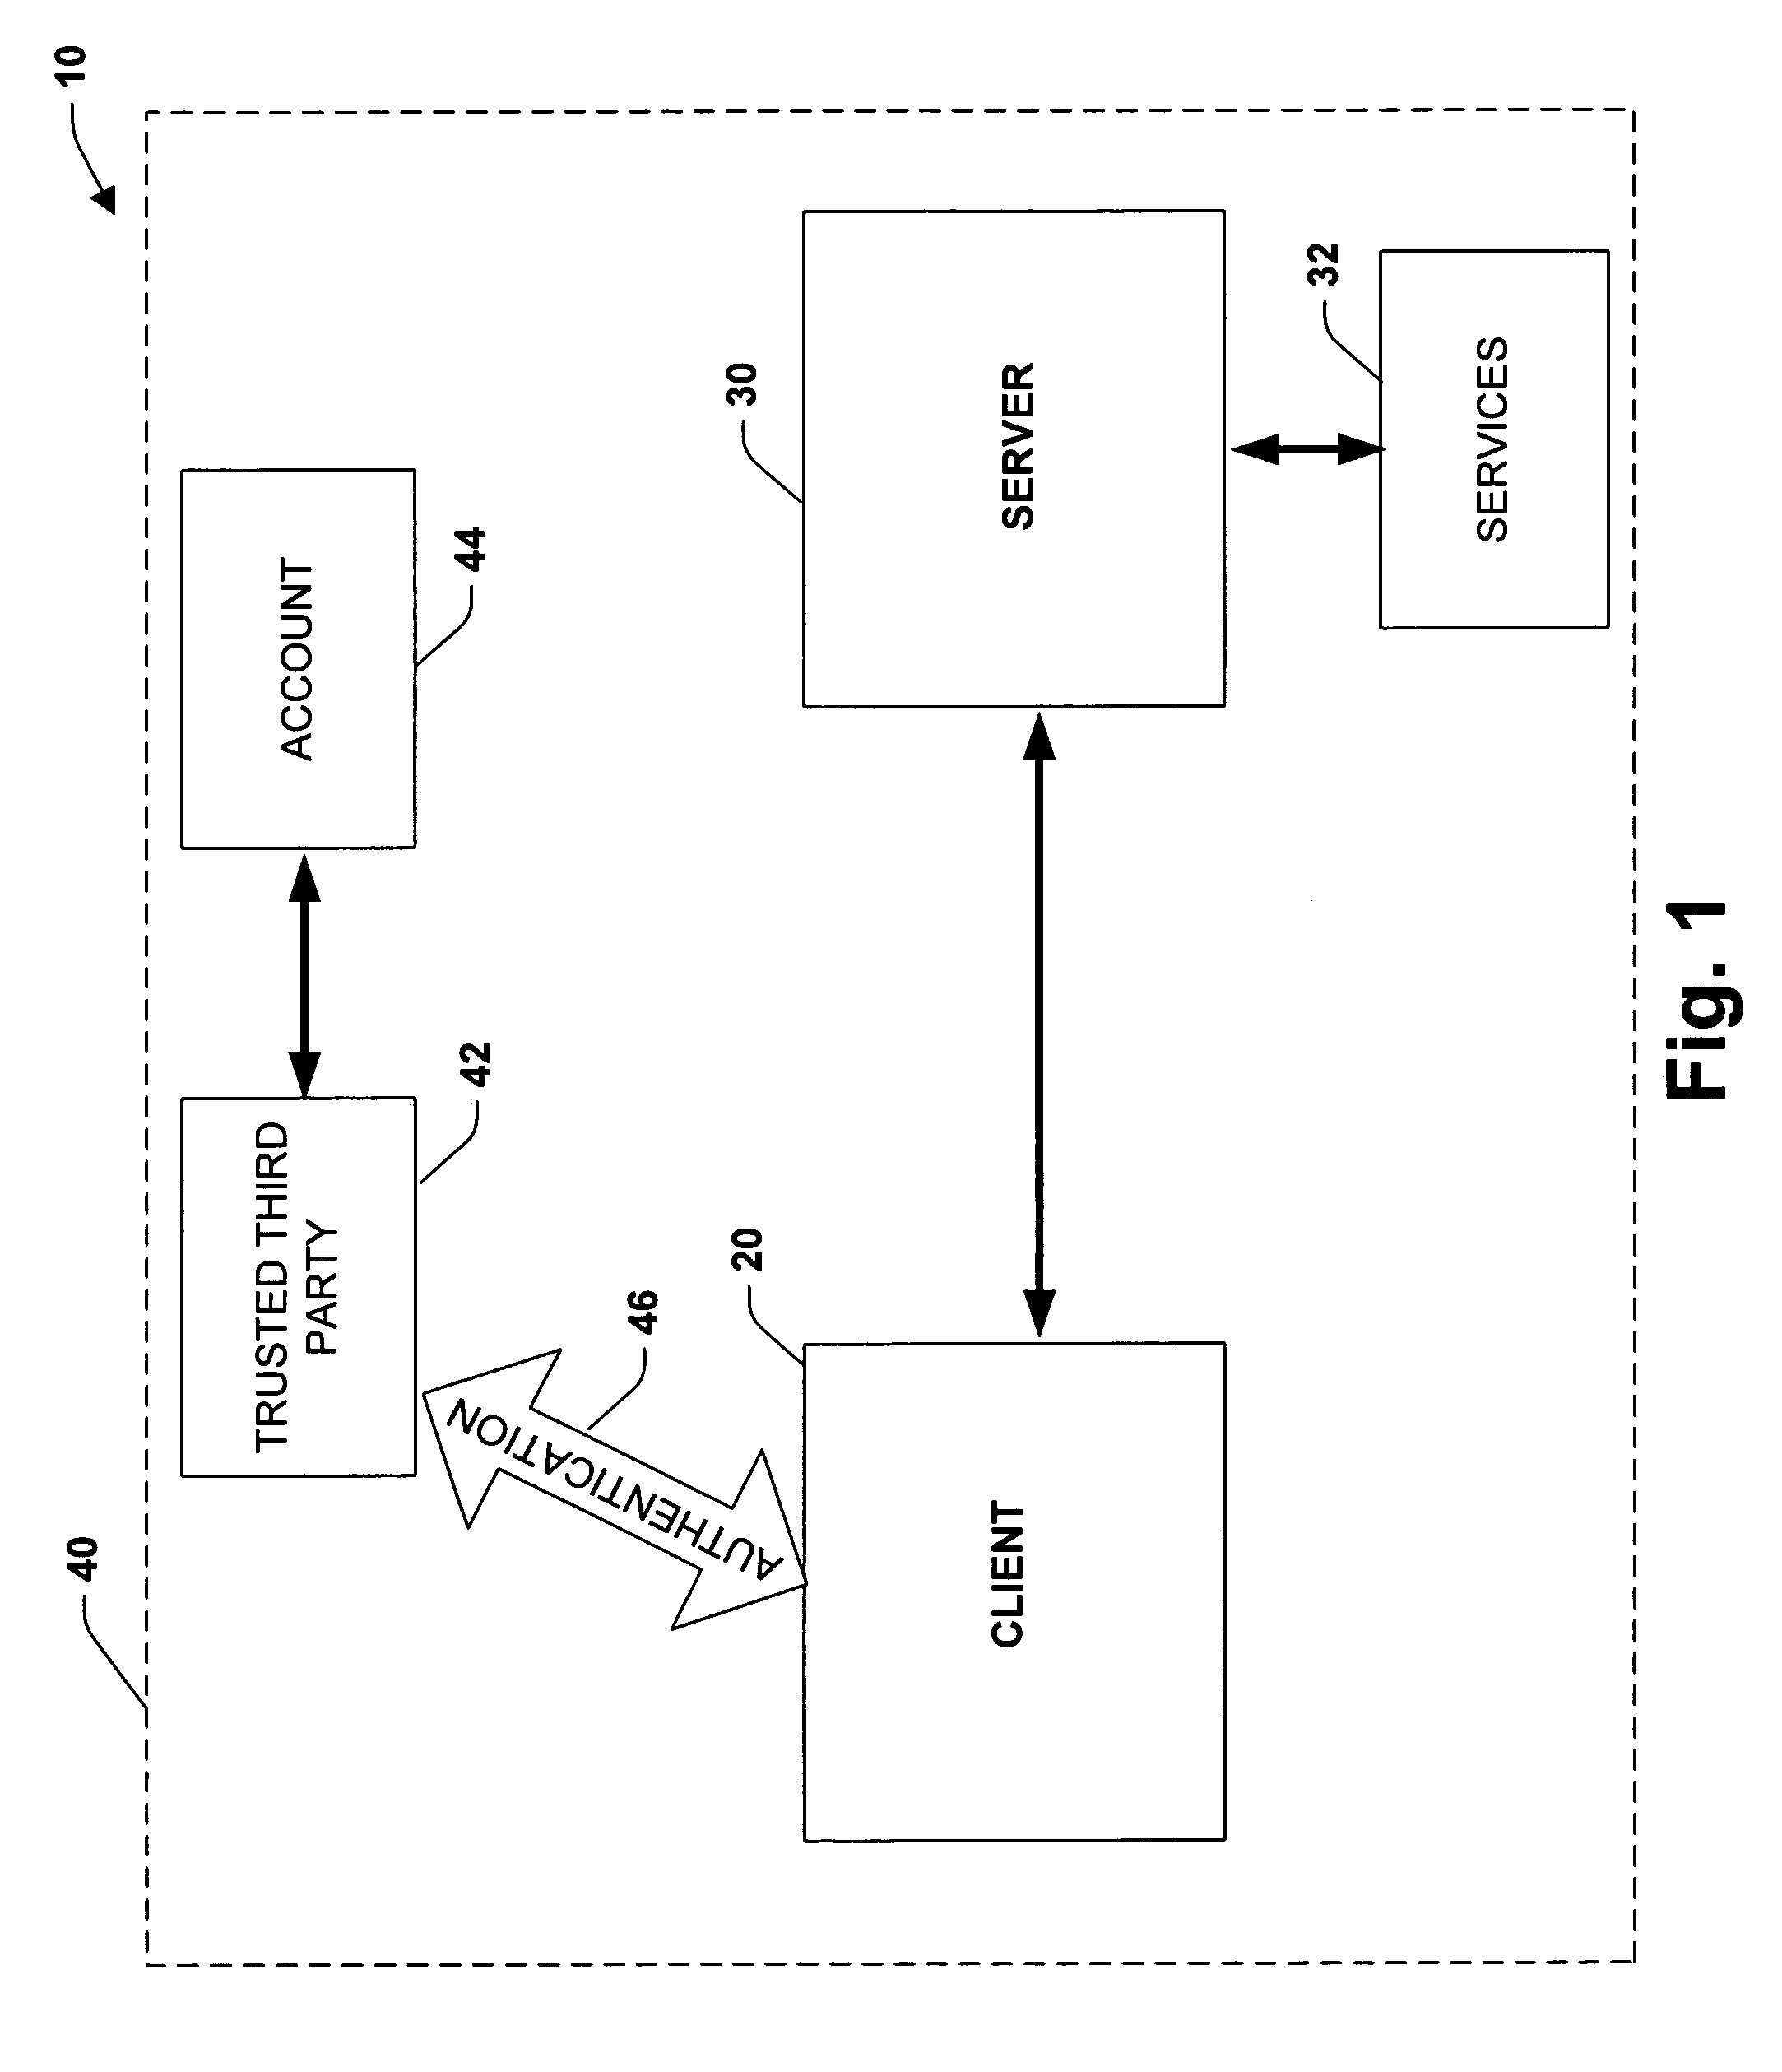 System and method for managing and authenticating services via service principal names